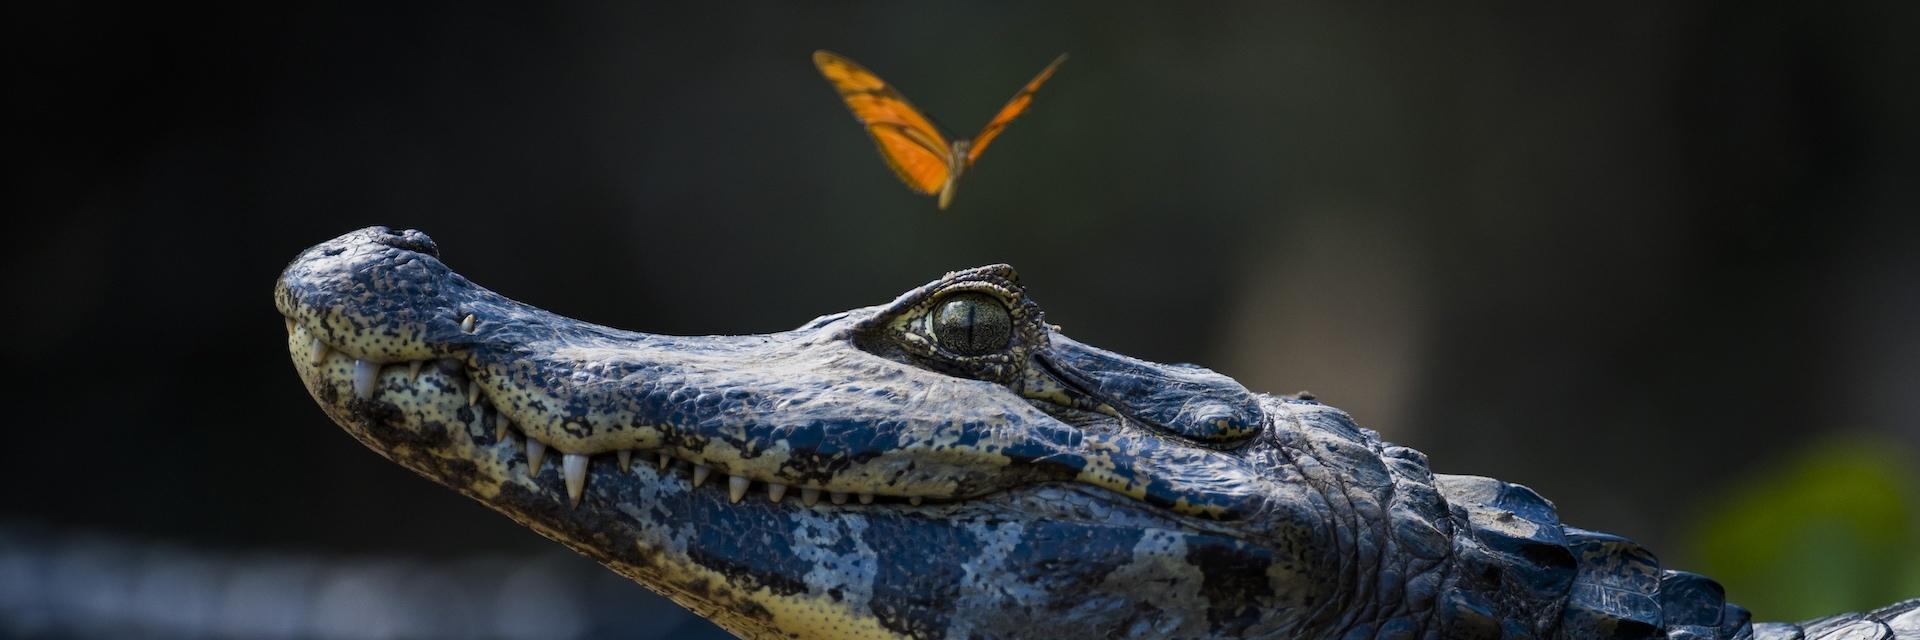 Butterfly on head of Yacare caiman (rocodilian in the family Alligatoridae).